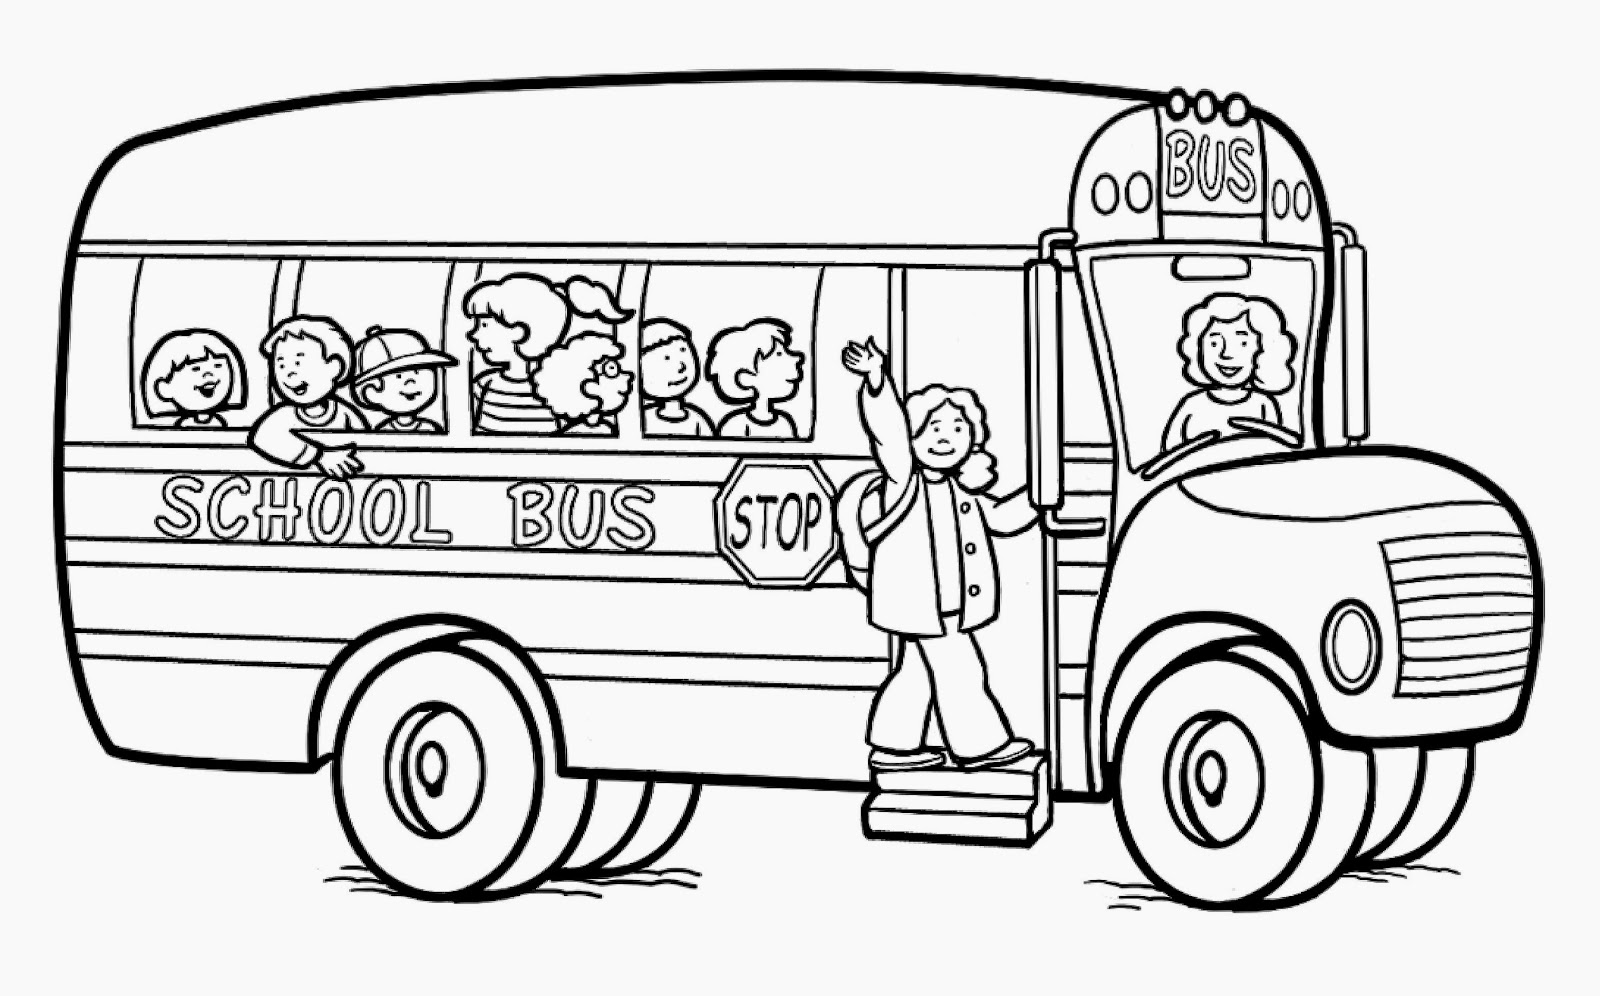 School Bus Coloring Page   Clip Art Library   Coloring Home